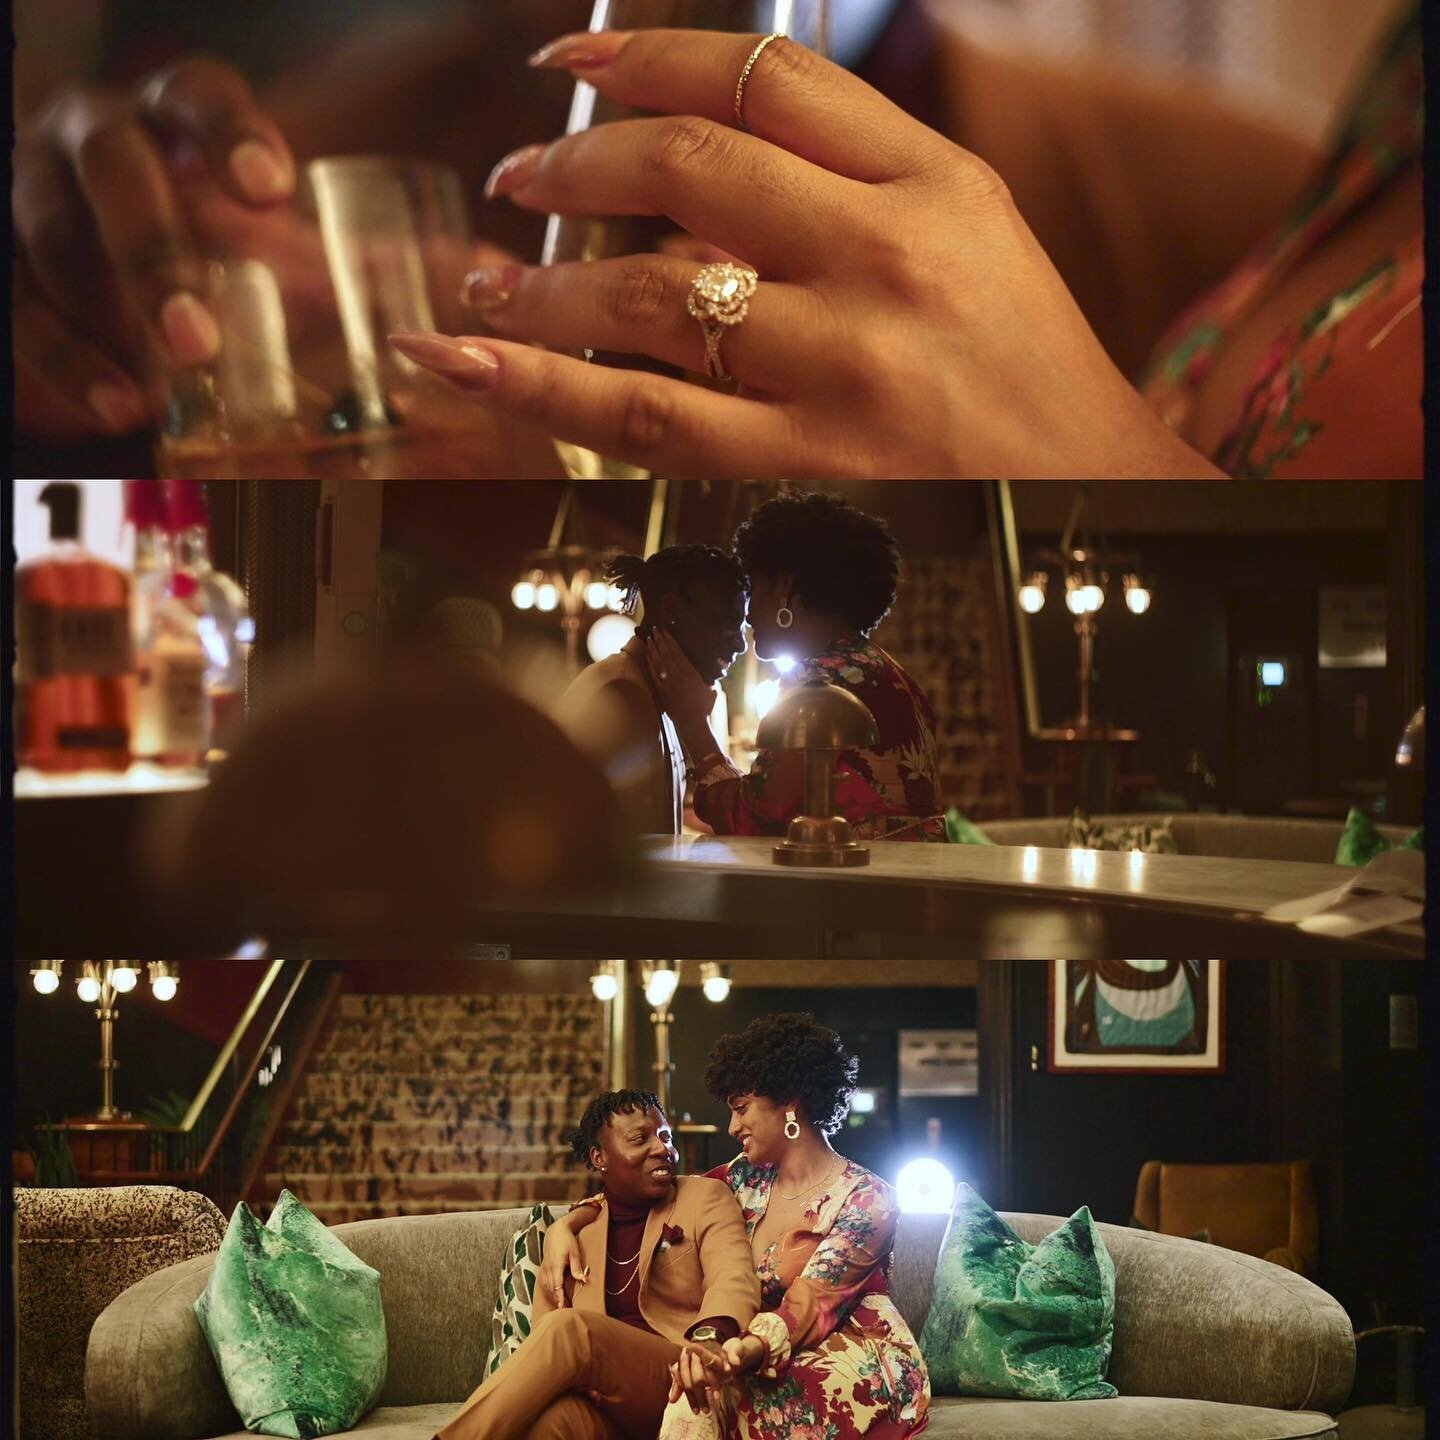 Never got around to post this video but here are some of our favorite frames for @gmarie36 &amp; @um_imlace engagement photo shoot filmed a year ago 💍🍿 #thetitusduranaffair 

Filmed at @louielouiephl @theinnatpenn